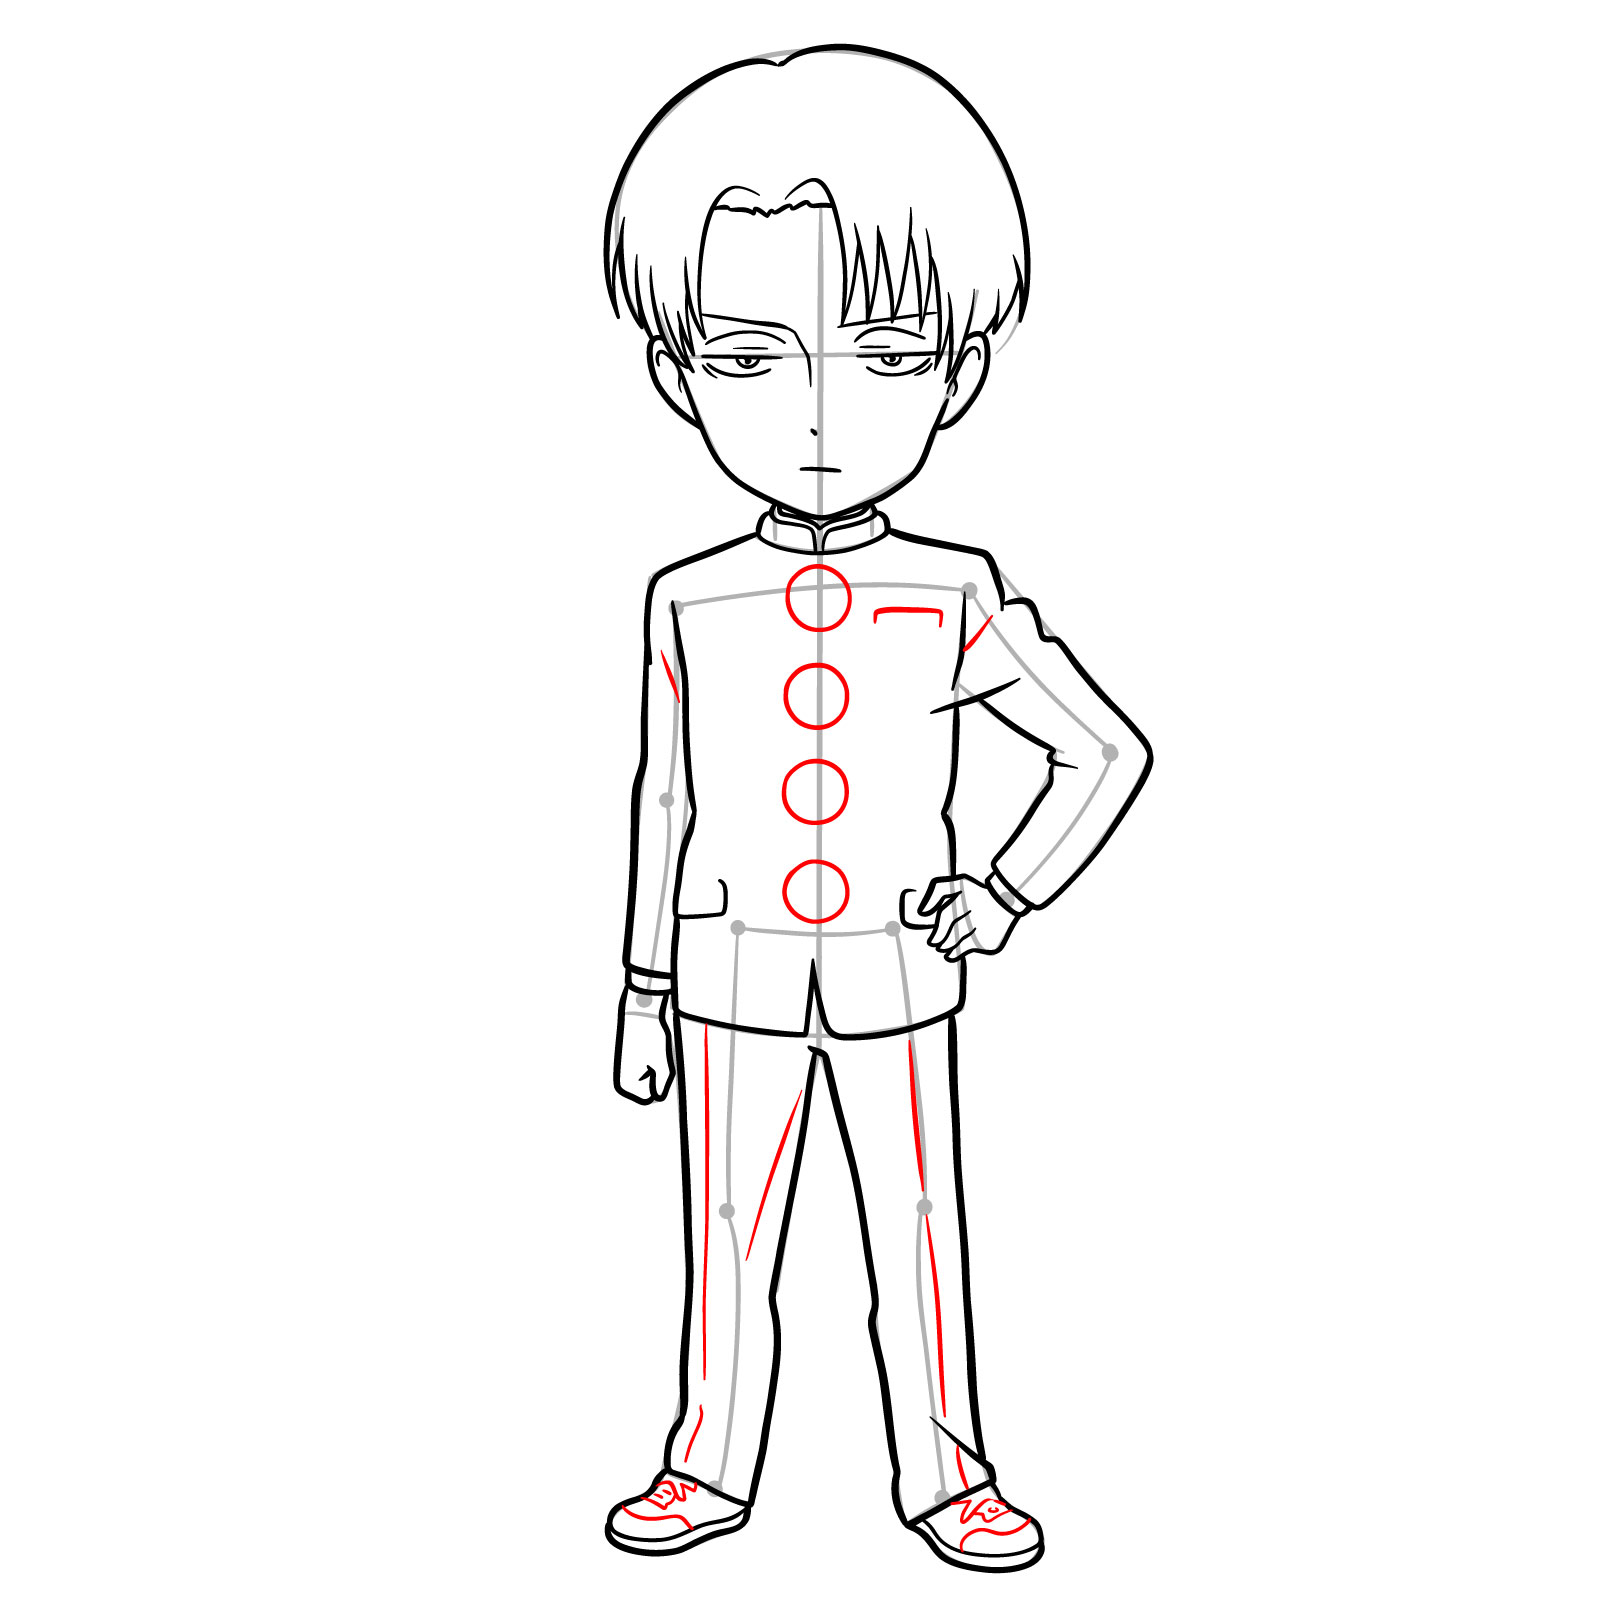 Final details added to chibi Levi's uniform in the drawing - step 18